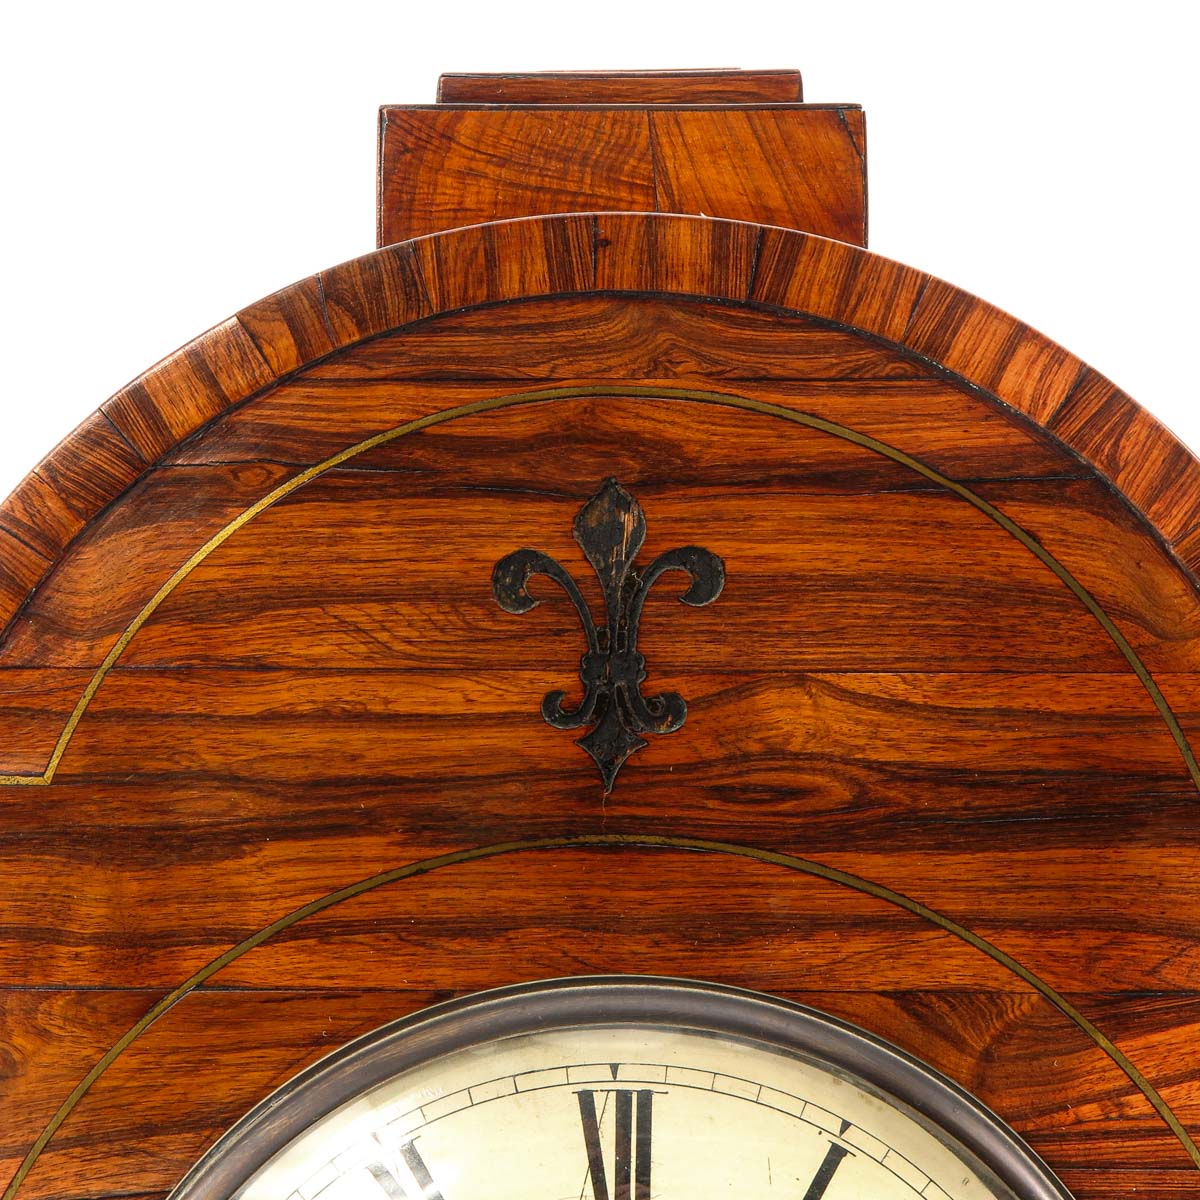 A Signed Table Clock - Image 9 of 9